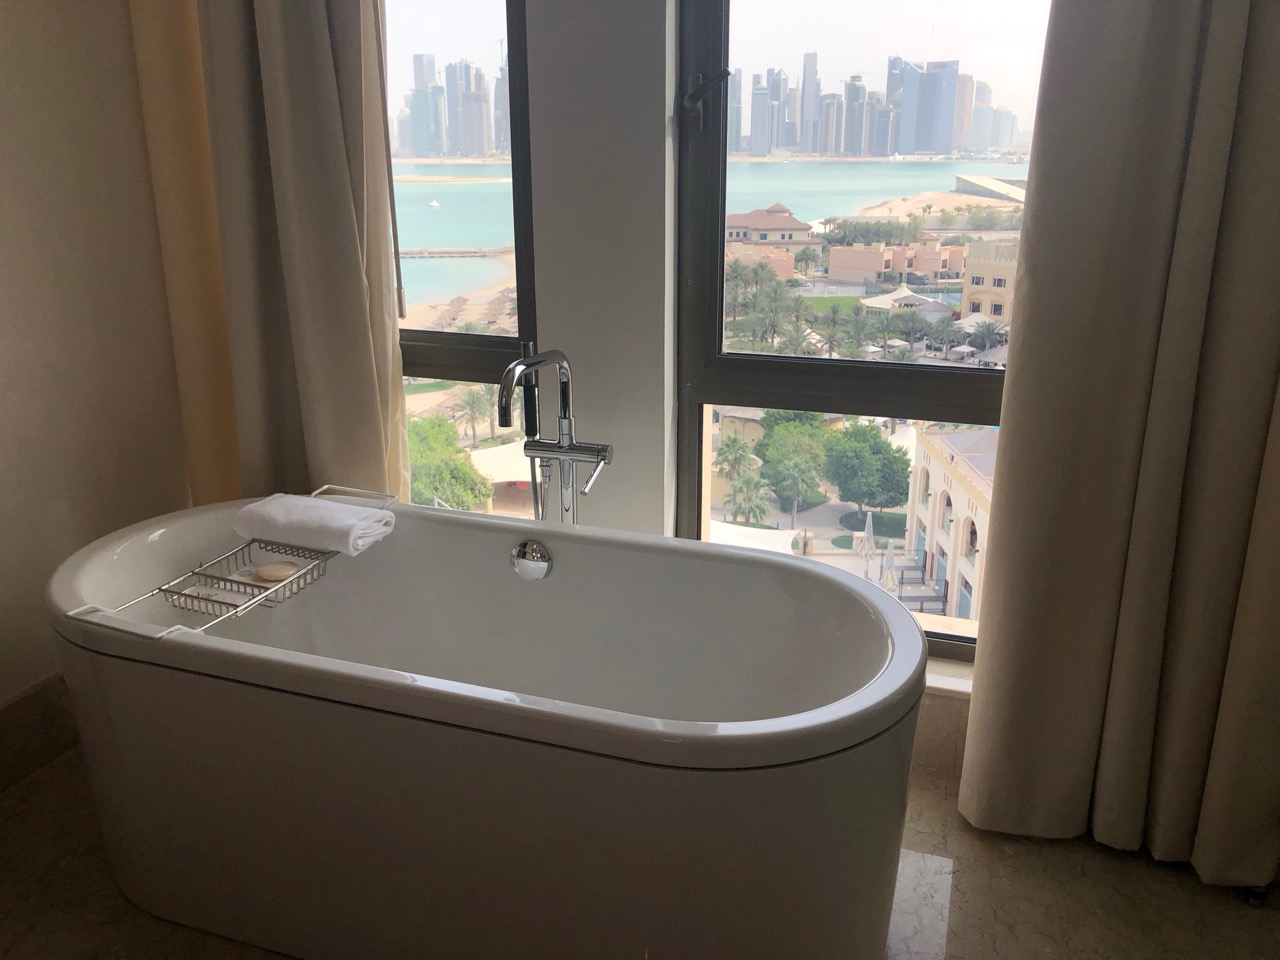 a bathtub in a bathroom with a view of a city and water